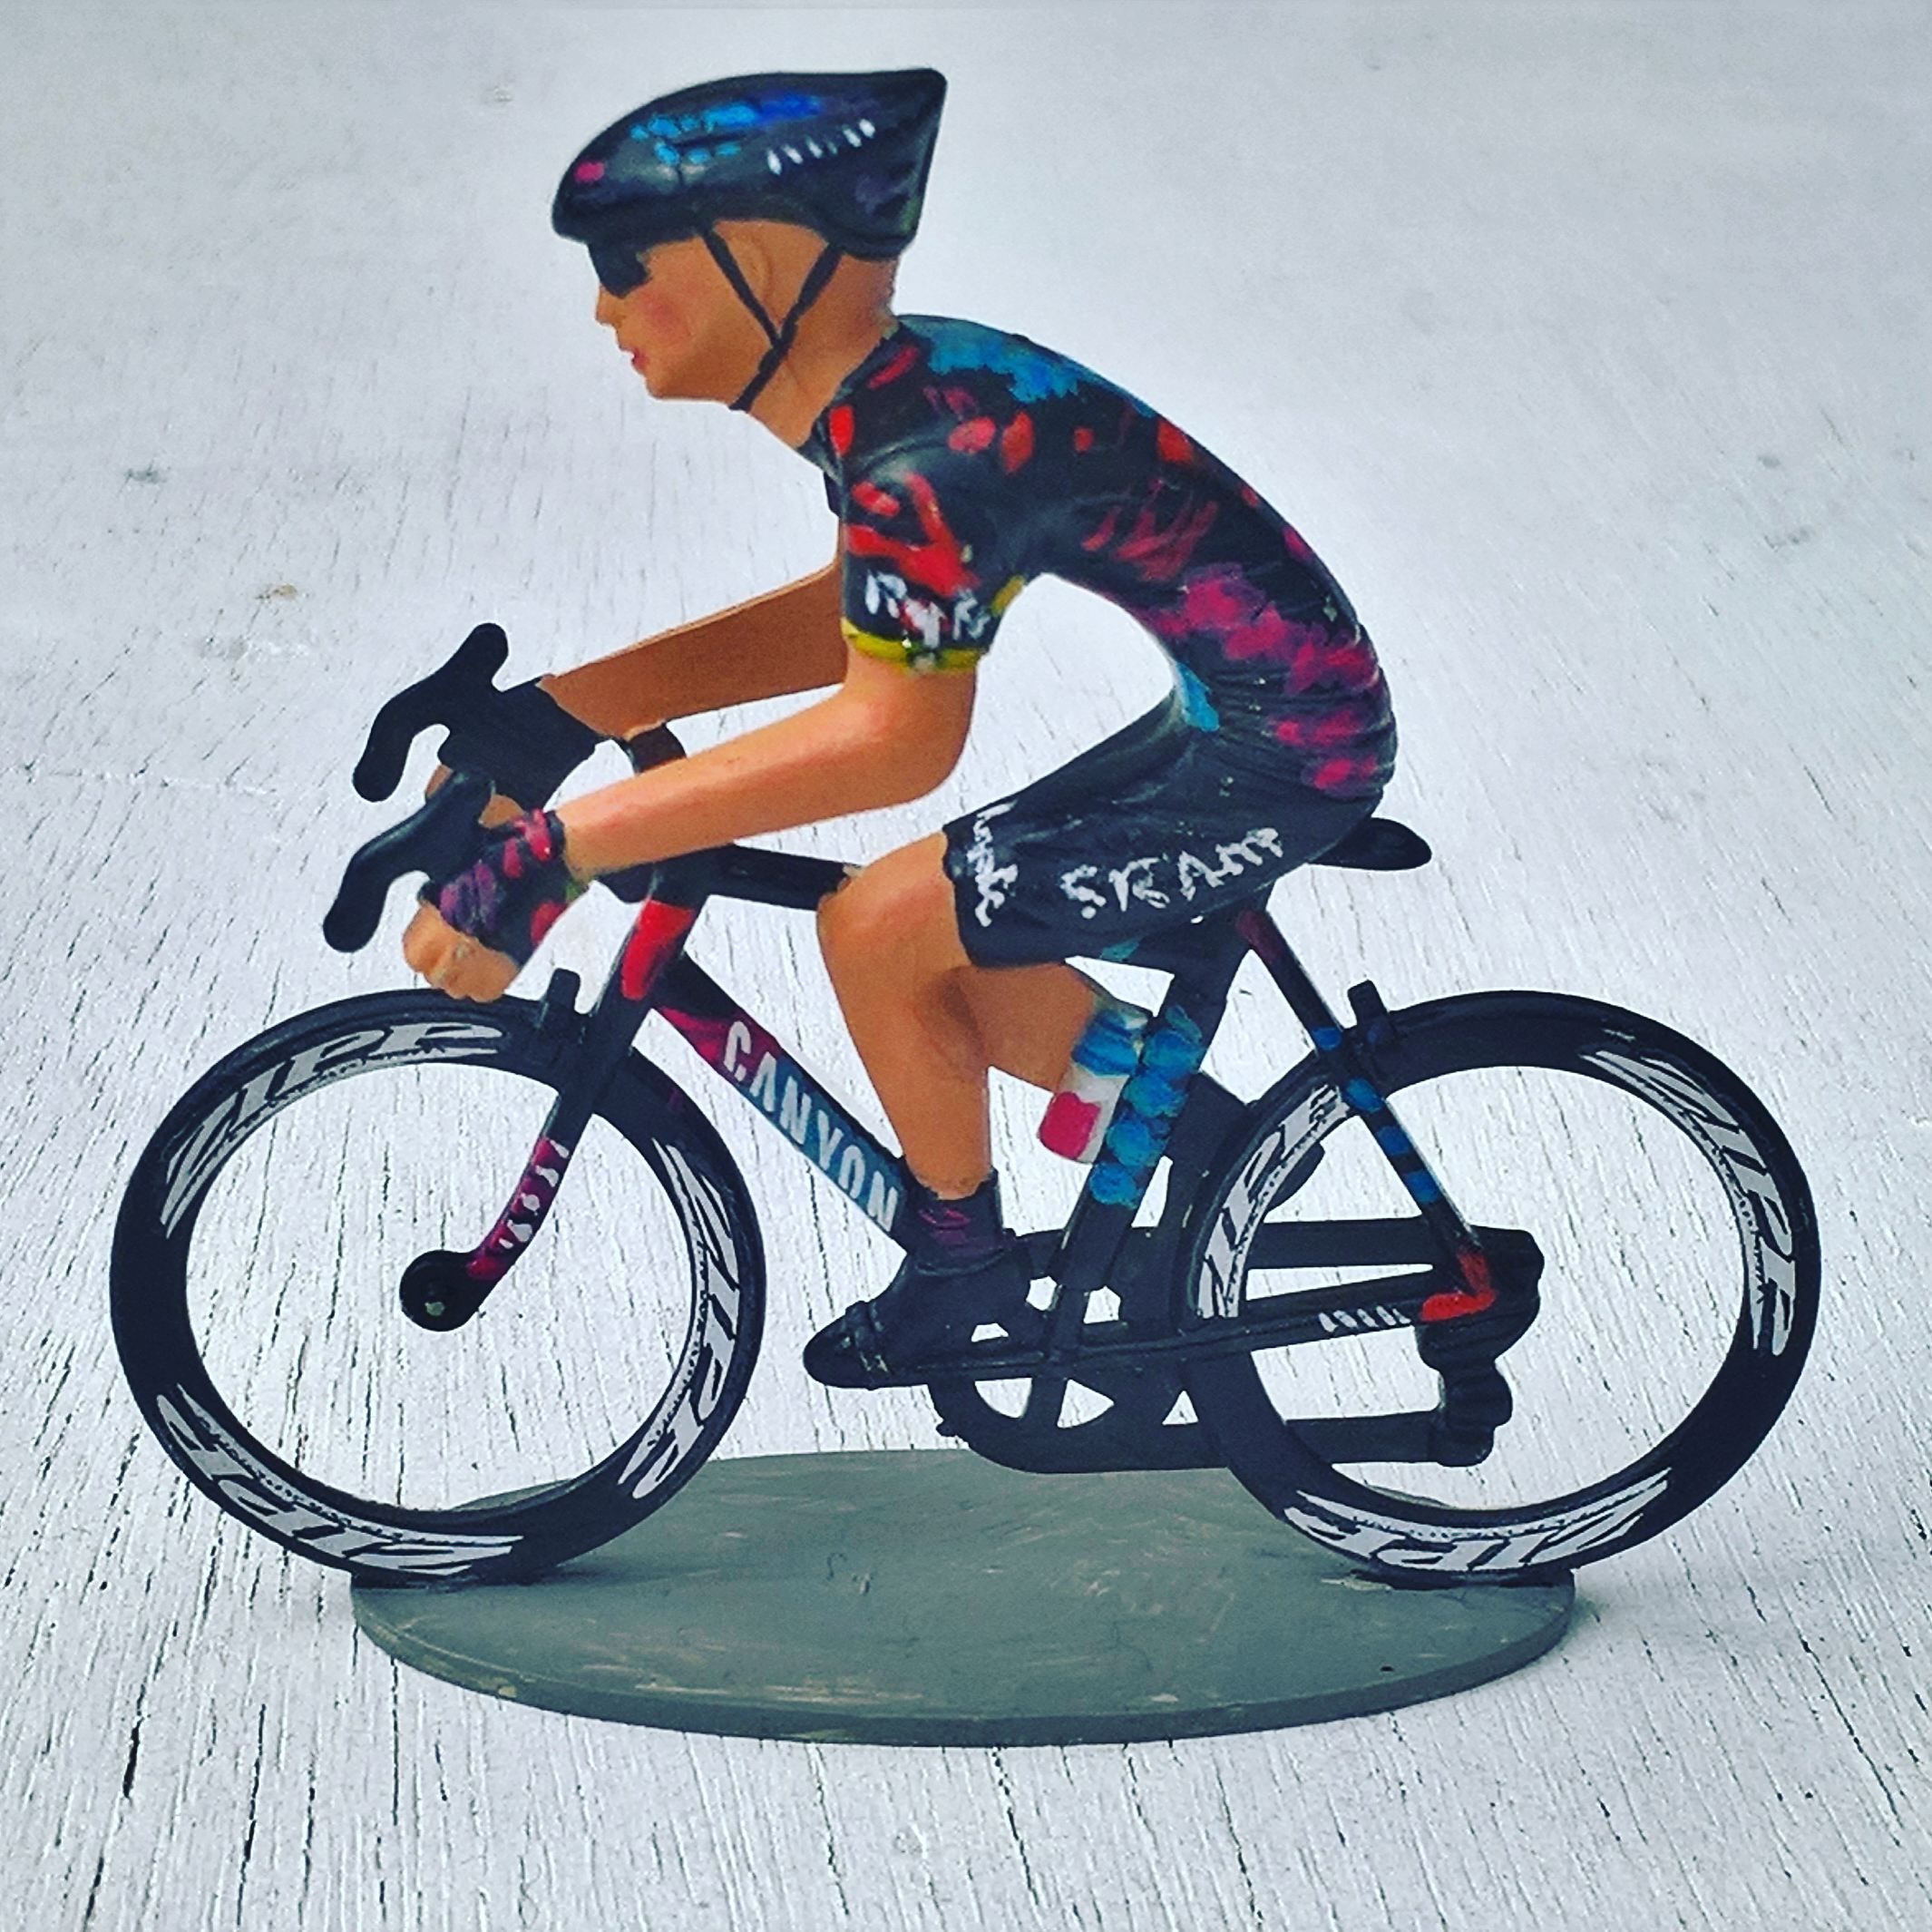 Canyon Sram @wmncycling plastic cycling figure | Cycling figures ...